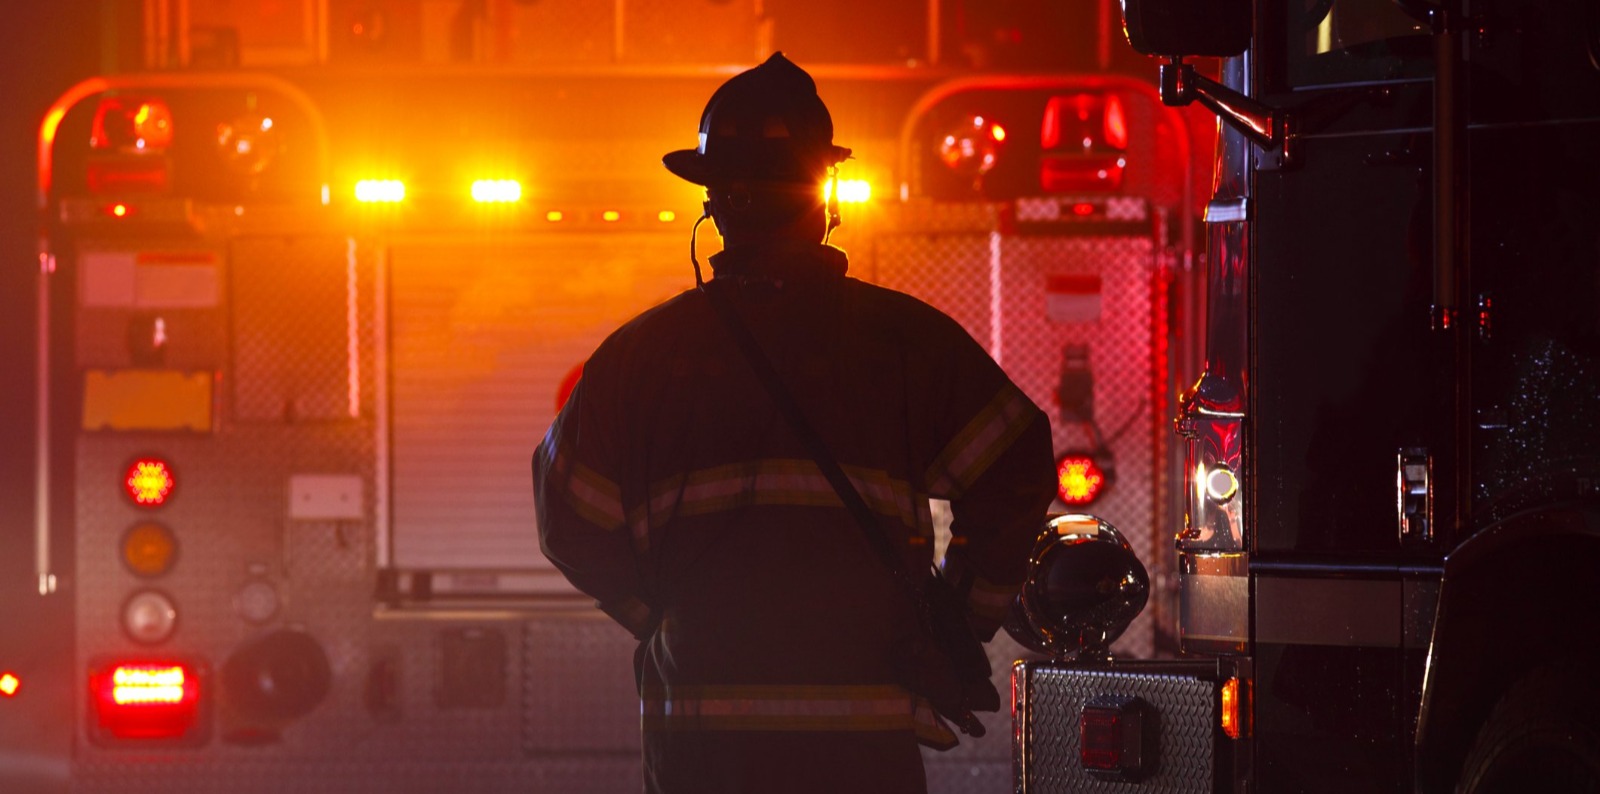 Firefighter silhouetted against a fire truck with flashing lights at an emergency scene